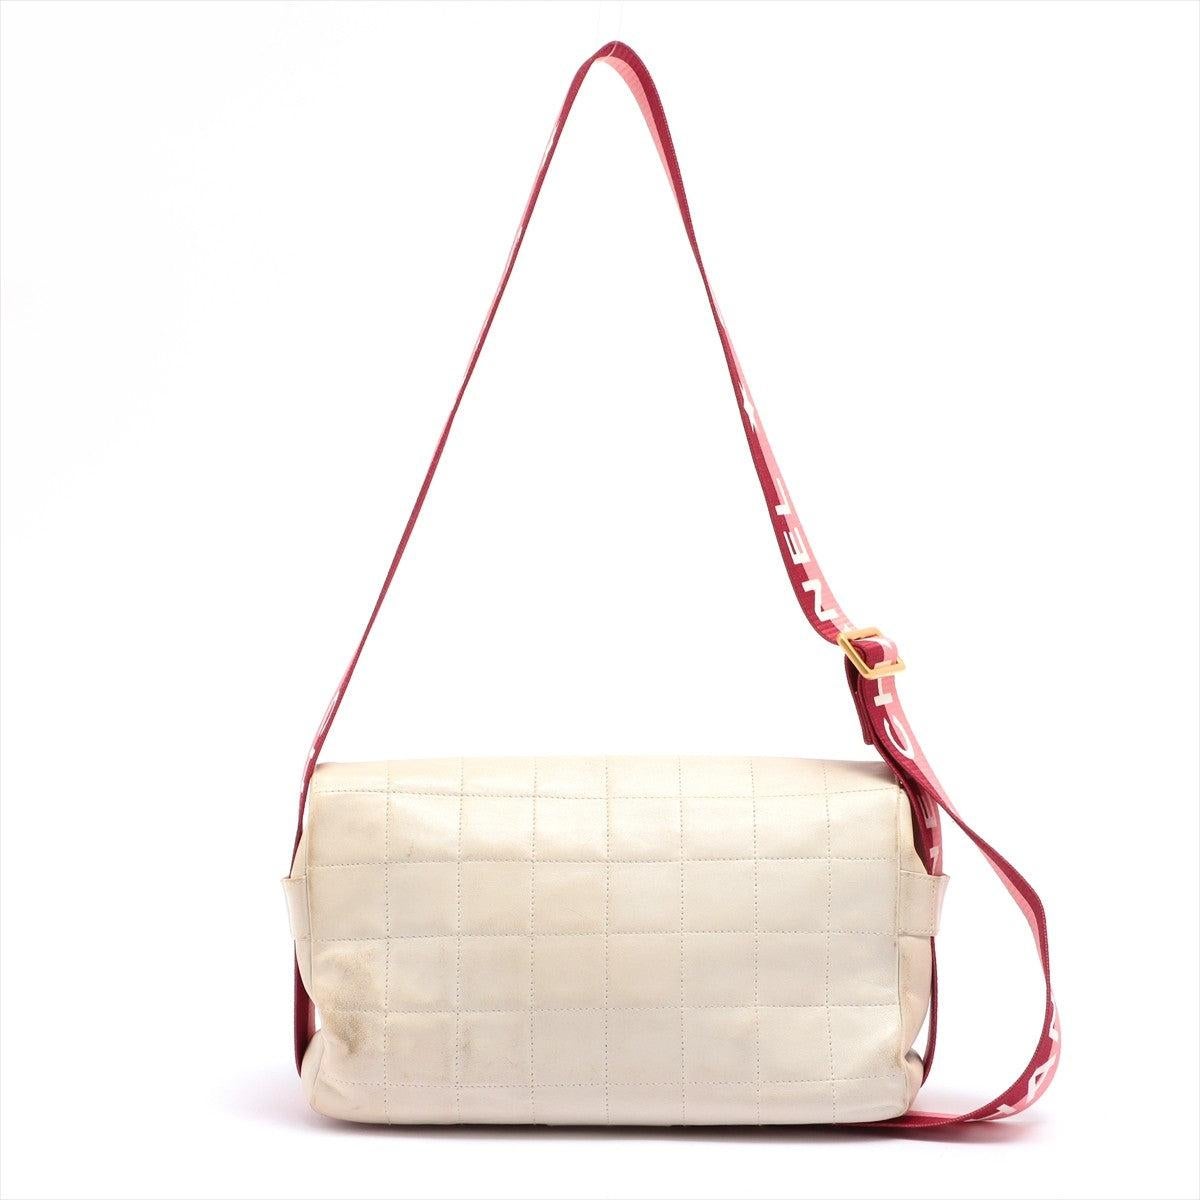 This Chanel shoulder bag is crafted in white lambskin leather with stylistic square Chocolate Bar quilting, featuring red 'CC' logo print on front flap and finished with red and pink striped canvas trim and an adjustable shoulder strap. This bag